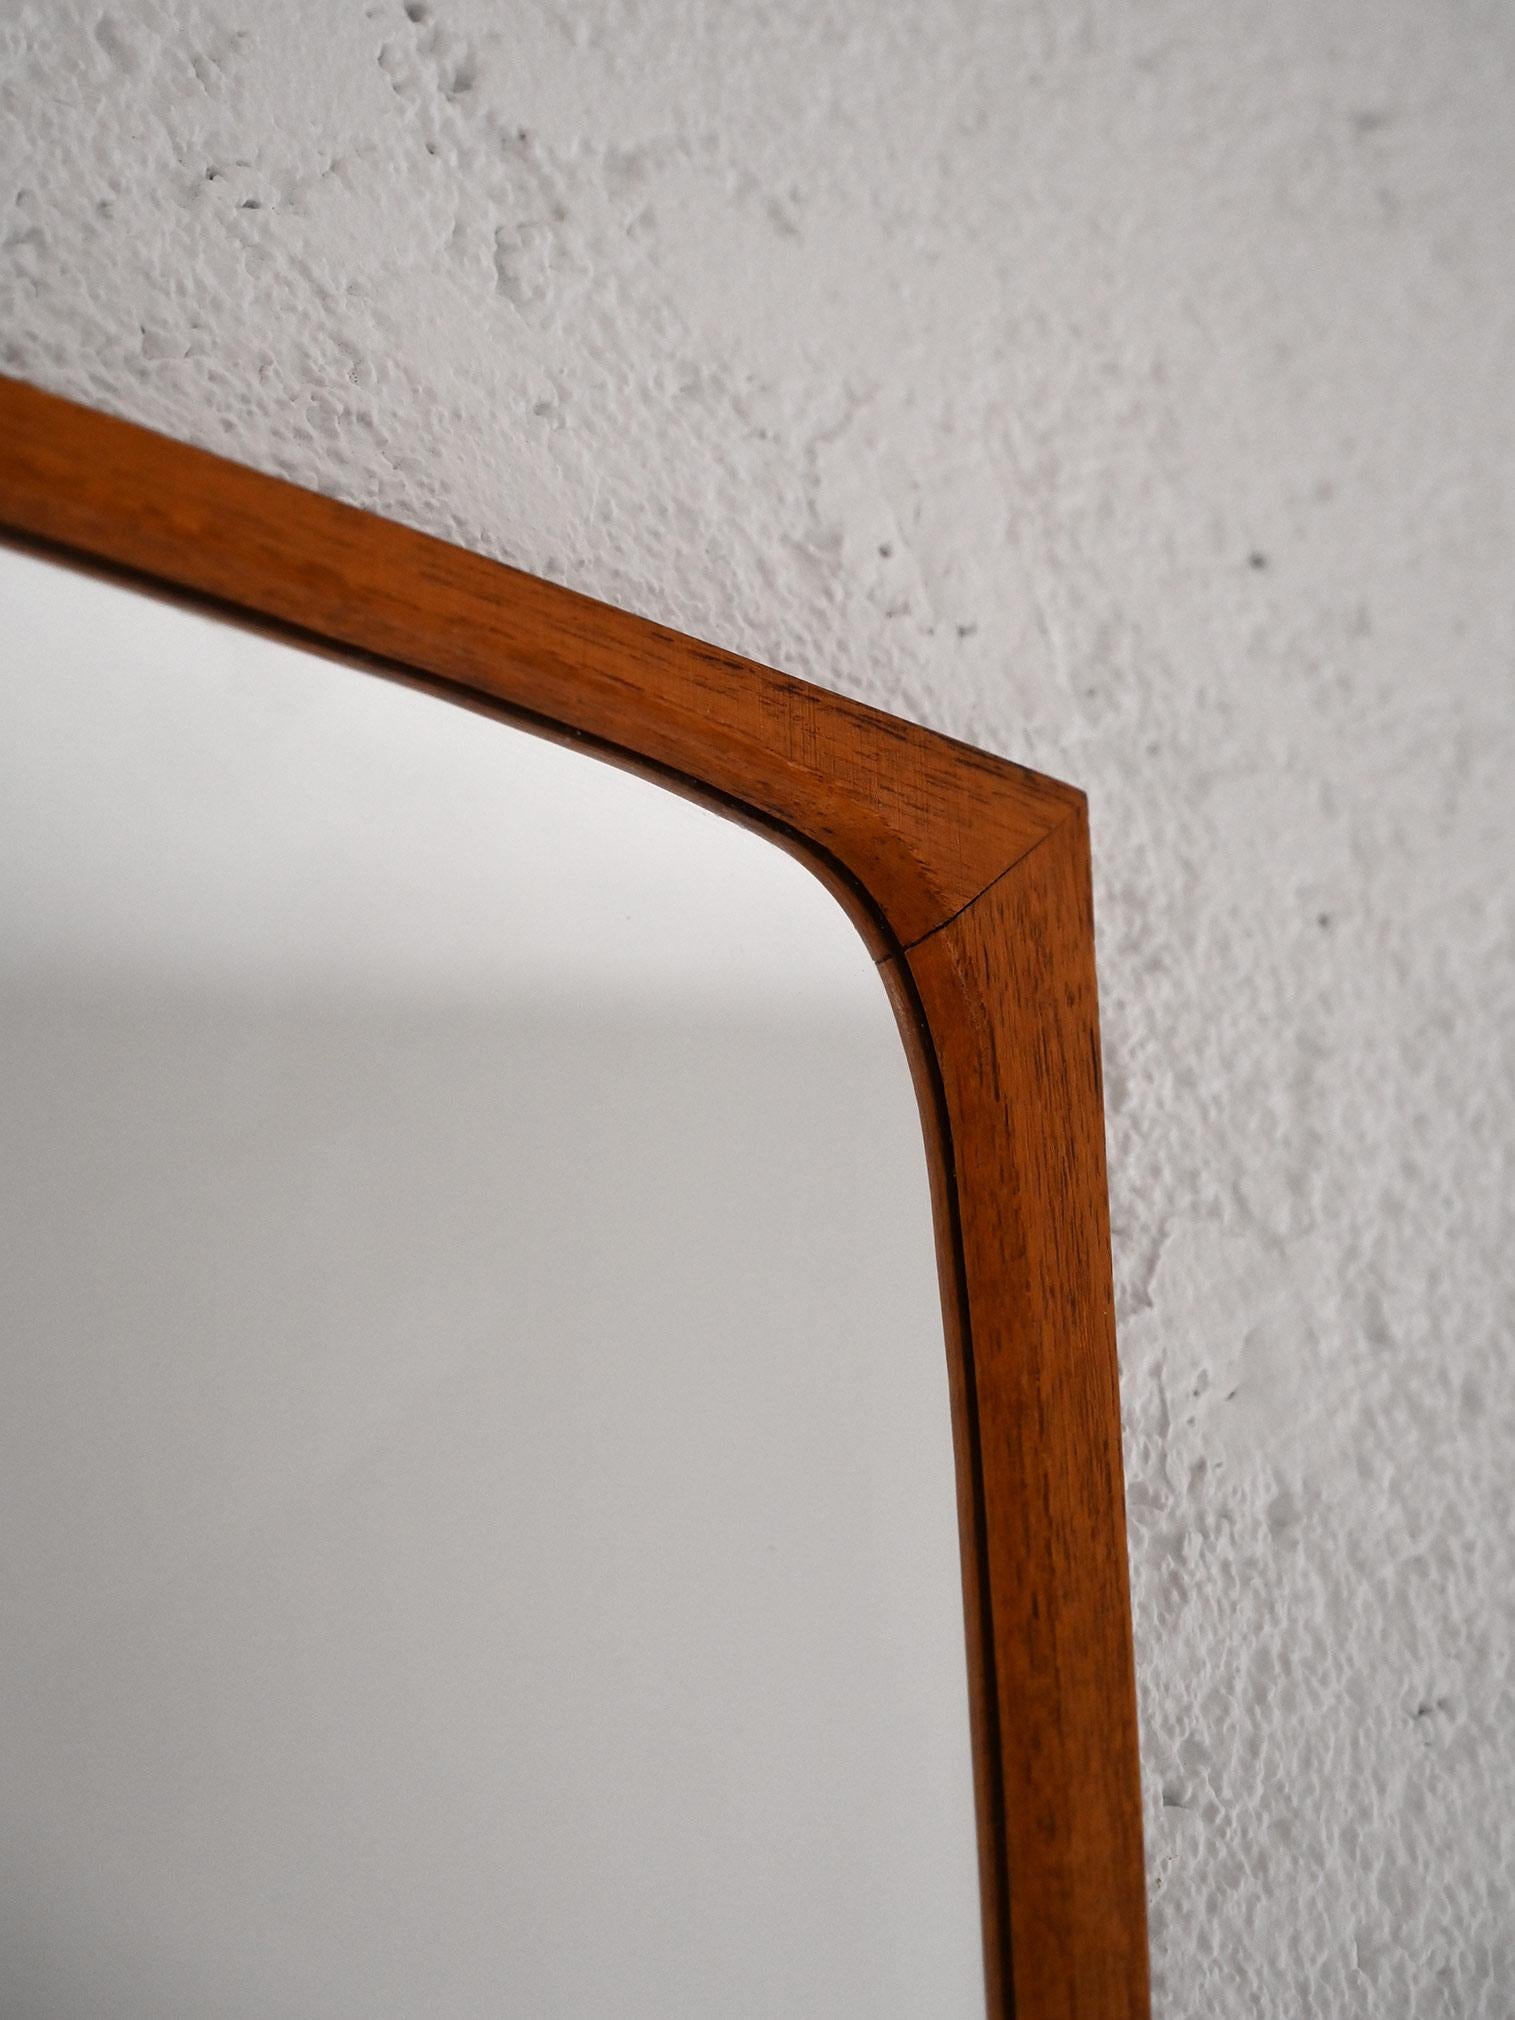 Vintage mirror of Scandinavian origin.

The characteristic feature of this mirror is the shape of the teak frame, which internally has rounded corners while externally is rectangular. The simple lines and attention to detail make it an elegant and